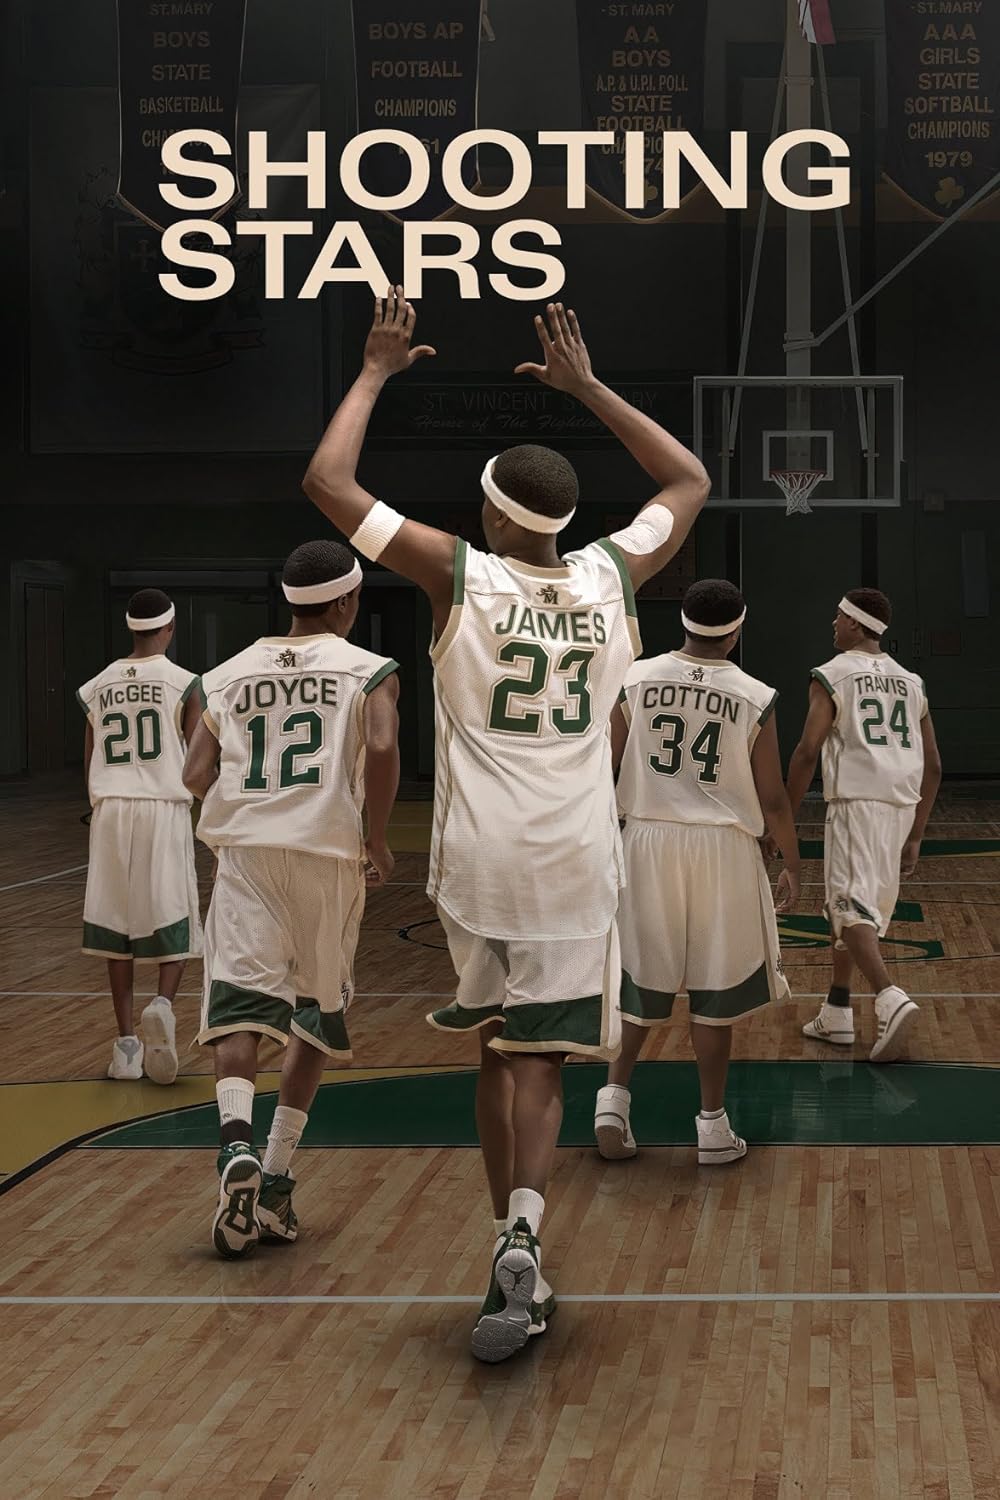 Released in June 2023, highly anticipated movie “Shooting Stars”, released on peacock. The movie highlights the high school career of four friends, including one of the greatest NBA players of all time, Lebron James.